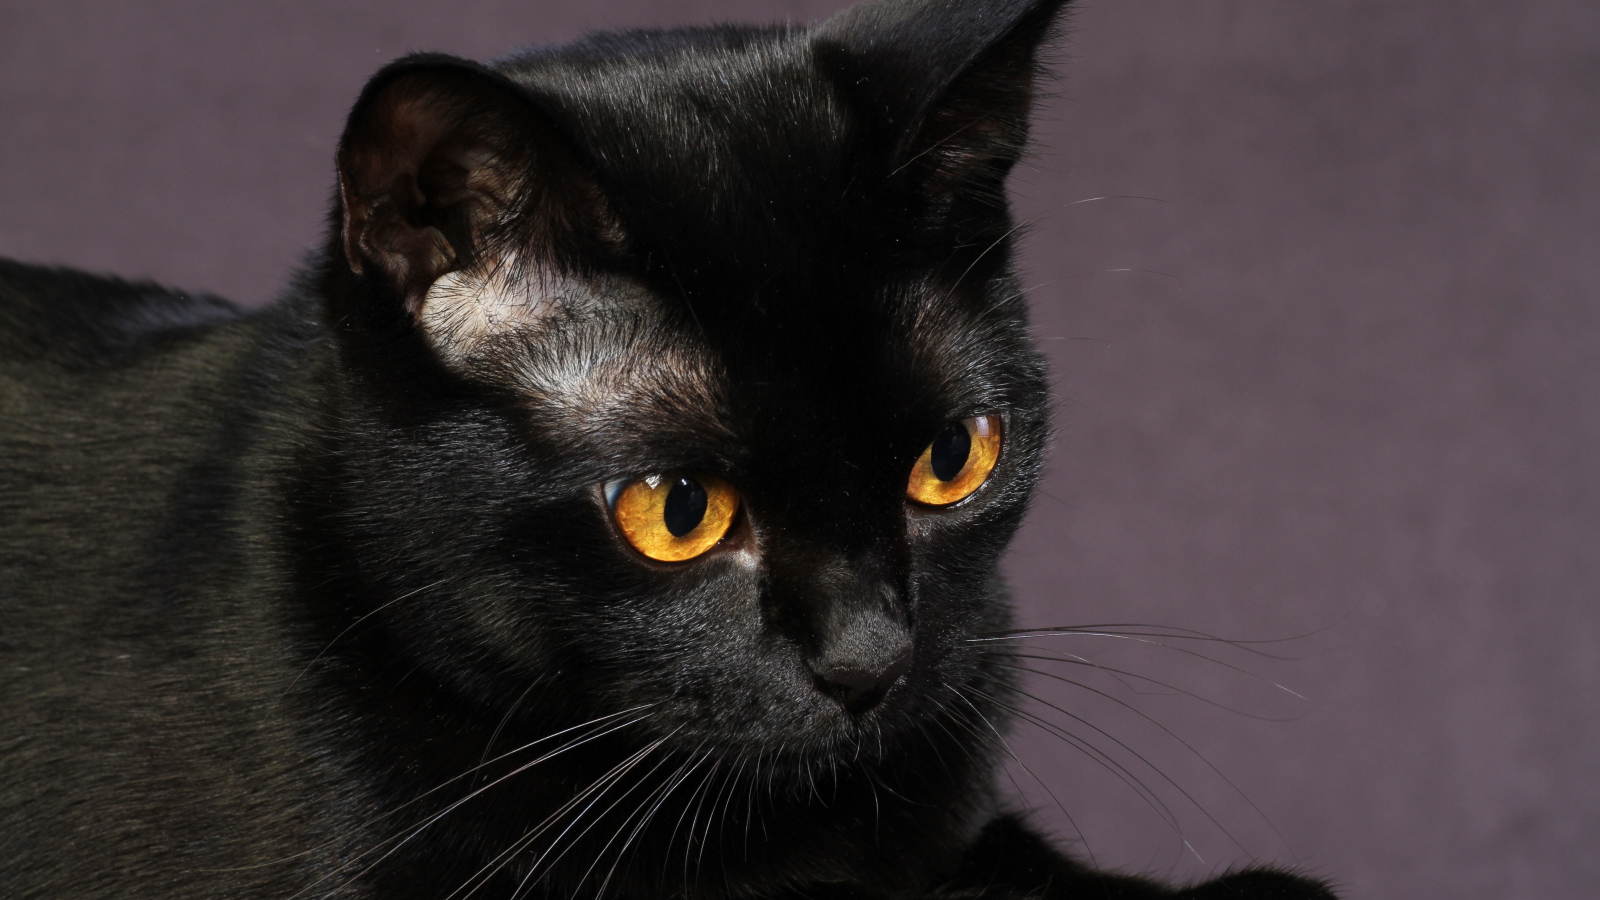 Young black cat on a purple background